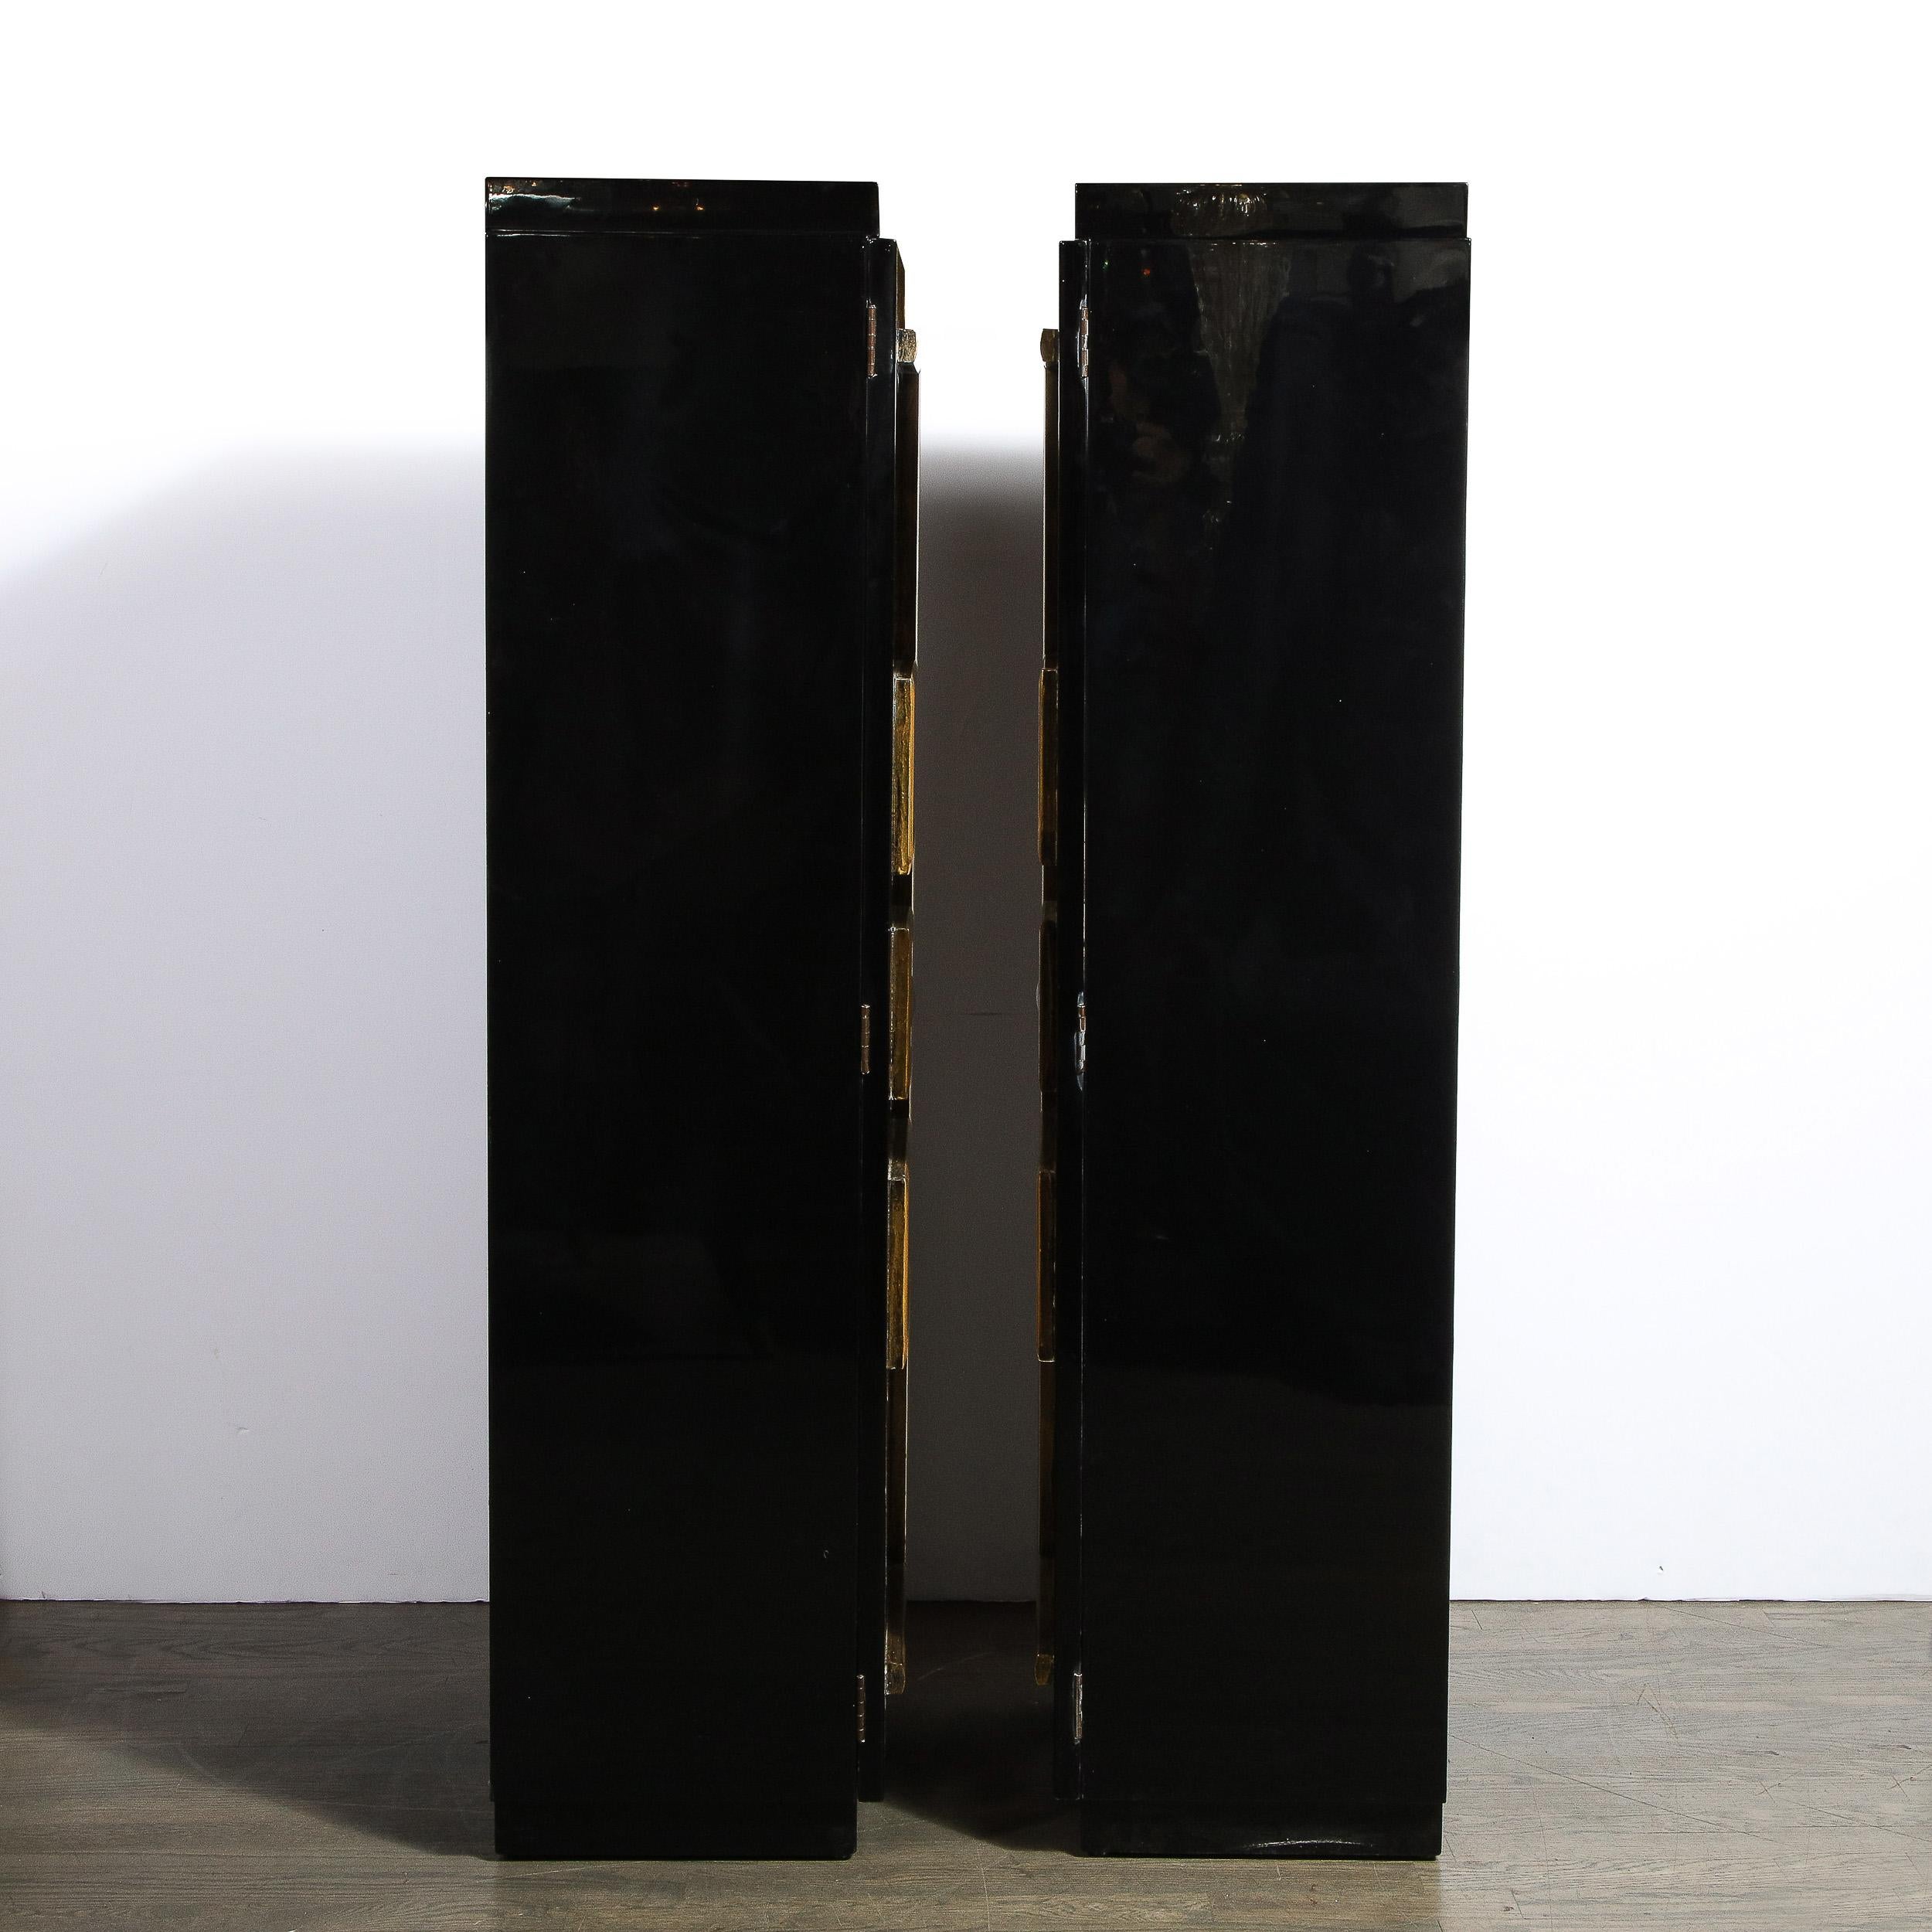 Lacquer Pair of Mid-Century Modern Greek Key Custom Pedestal Cabinets by James Mont 